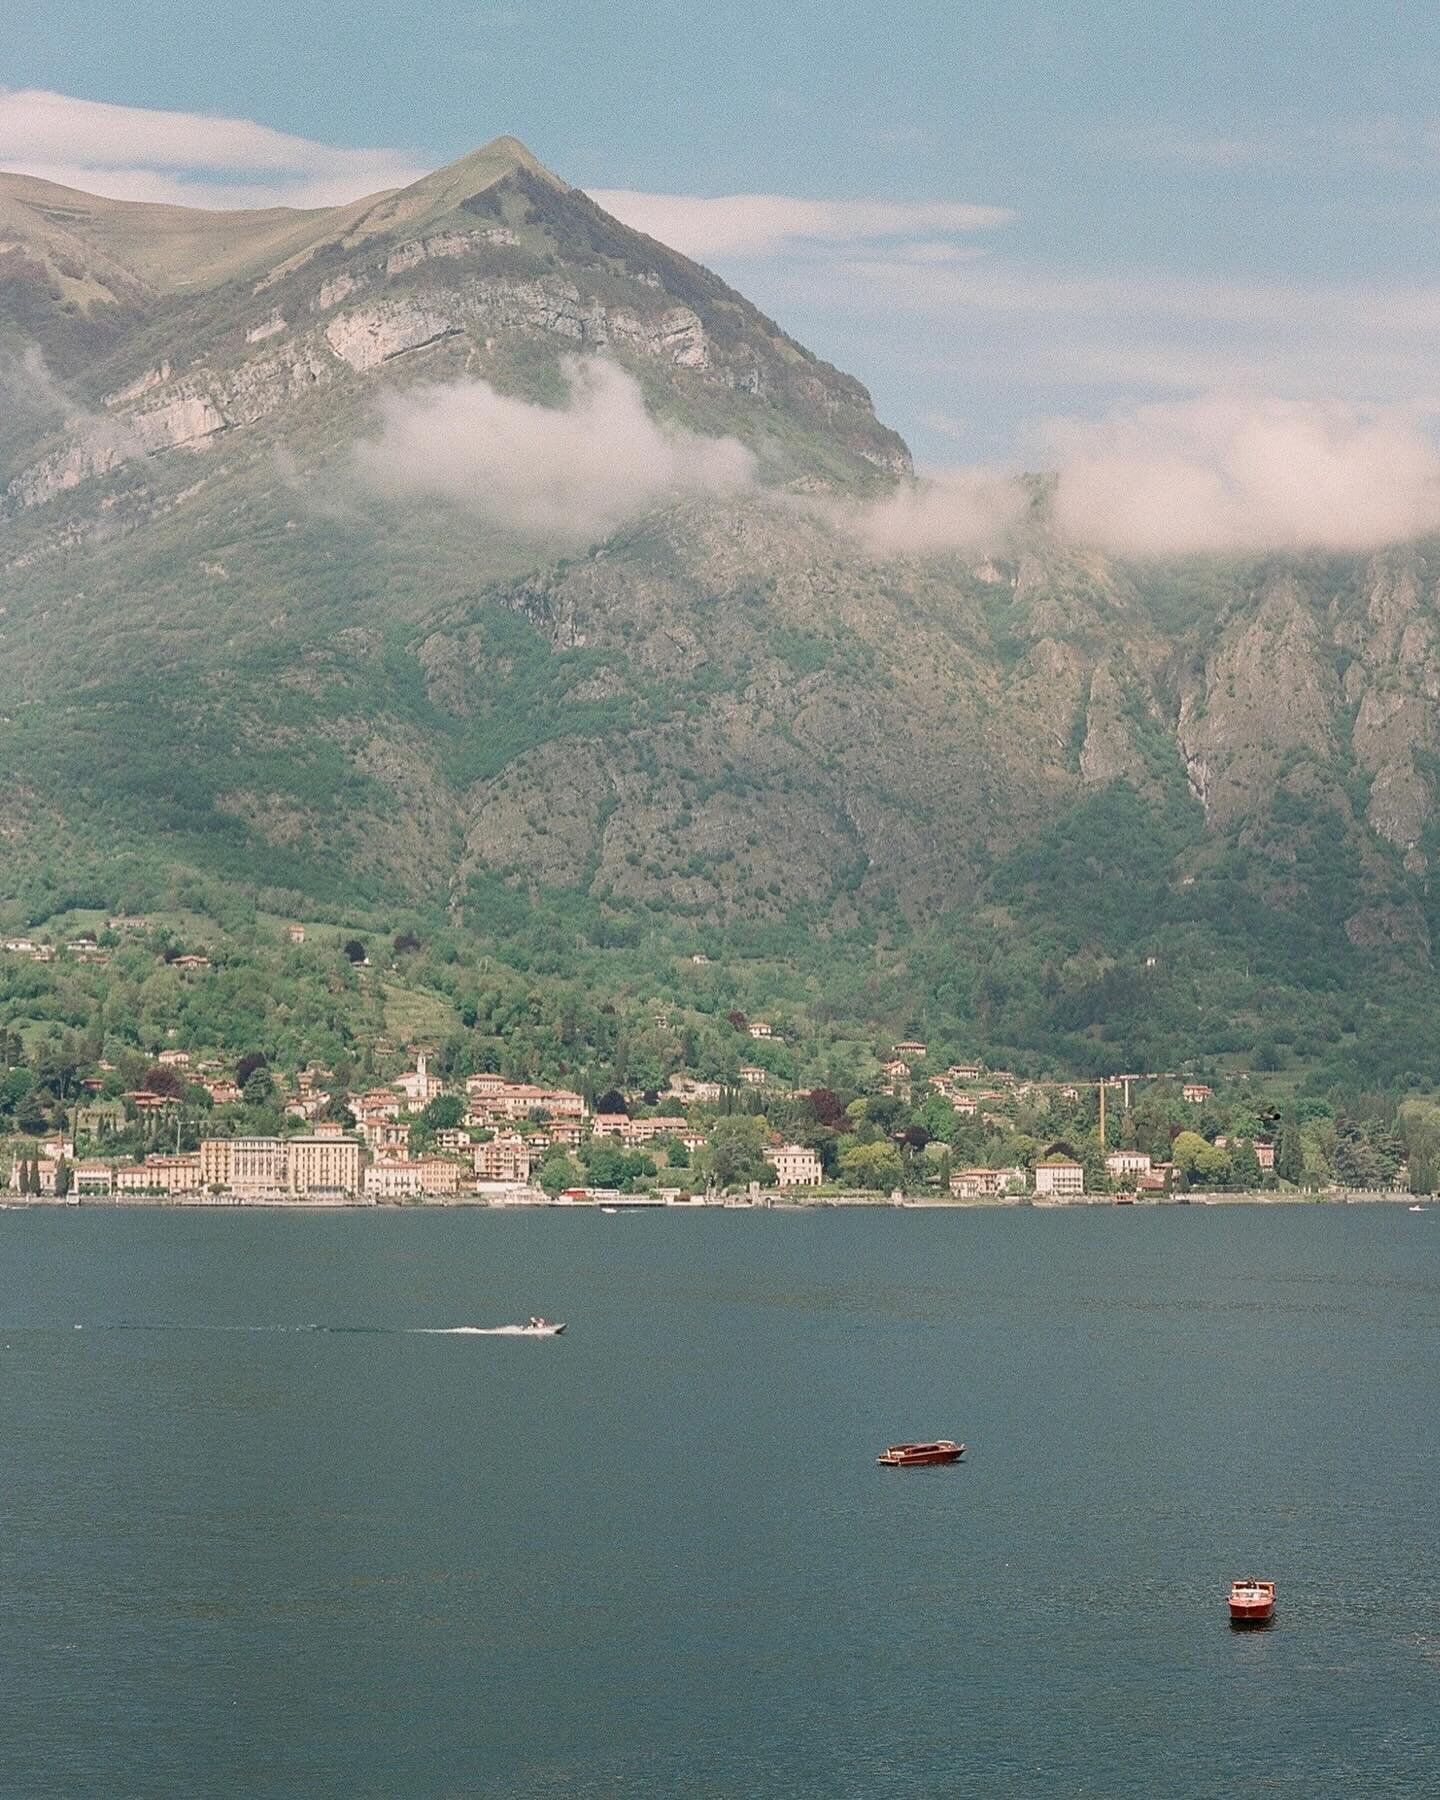 Breathtaking 🇮🇹 Lago di Como
I stood in awe, before loading film and raising my camera, of sweeping views, at the Pearl of the lake, Bellagio, where as far as the eye can see the Swiss alps cascade to meet the shoreline,  dotted in iconic villas an